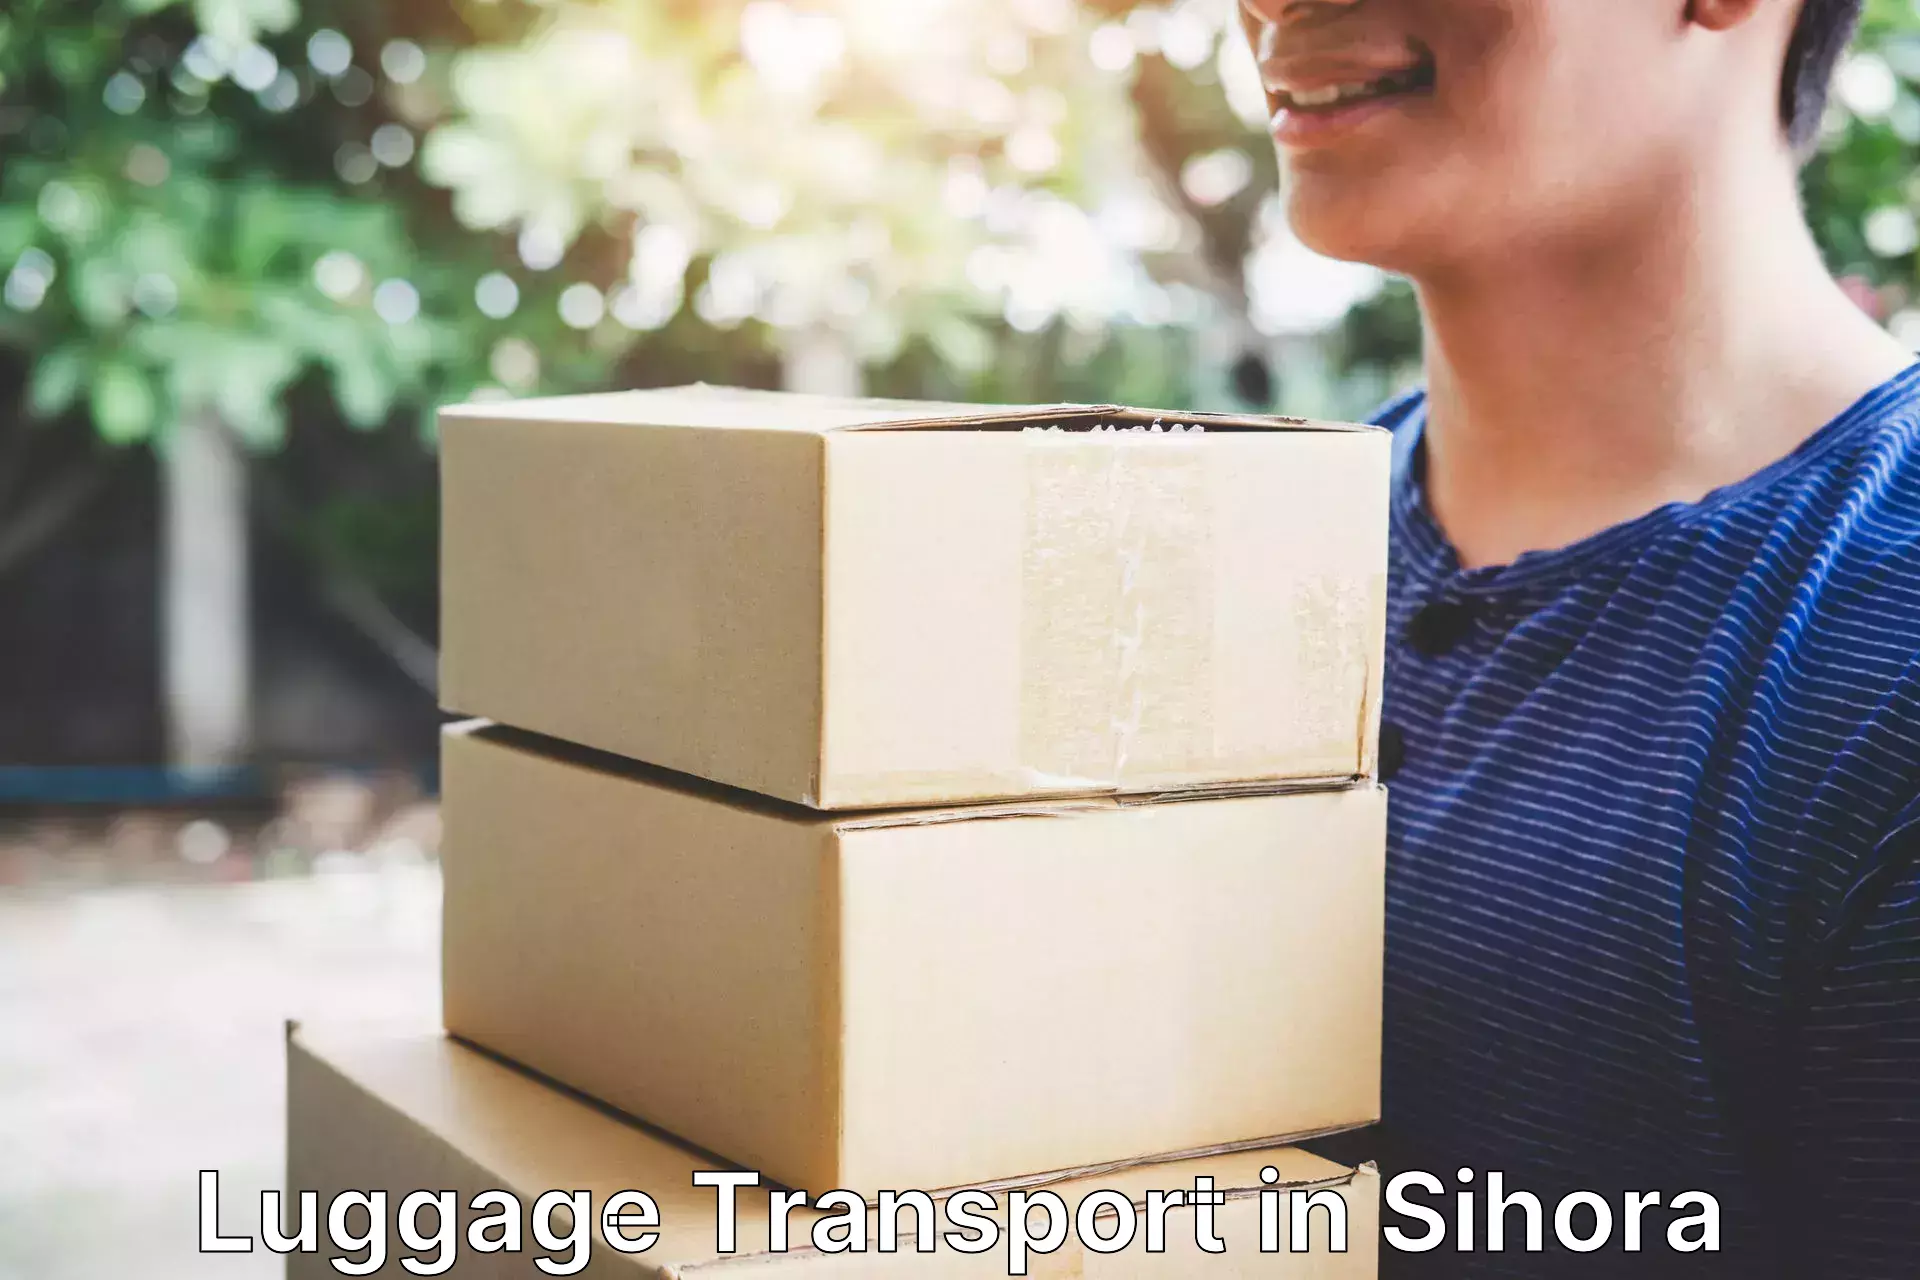 Baggage transport technology in Sihora